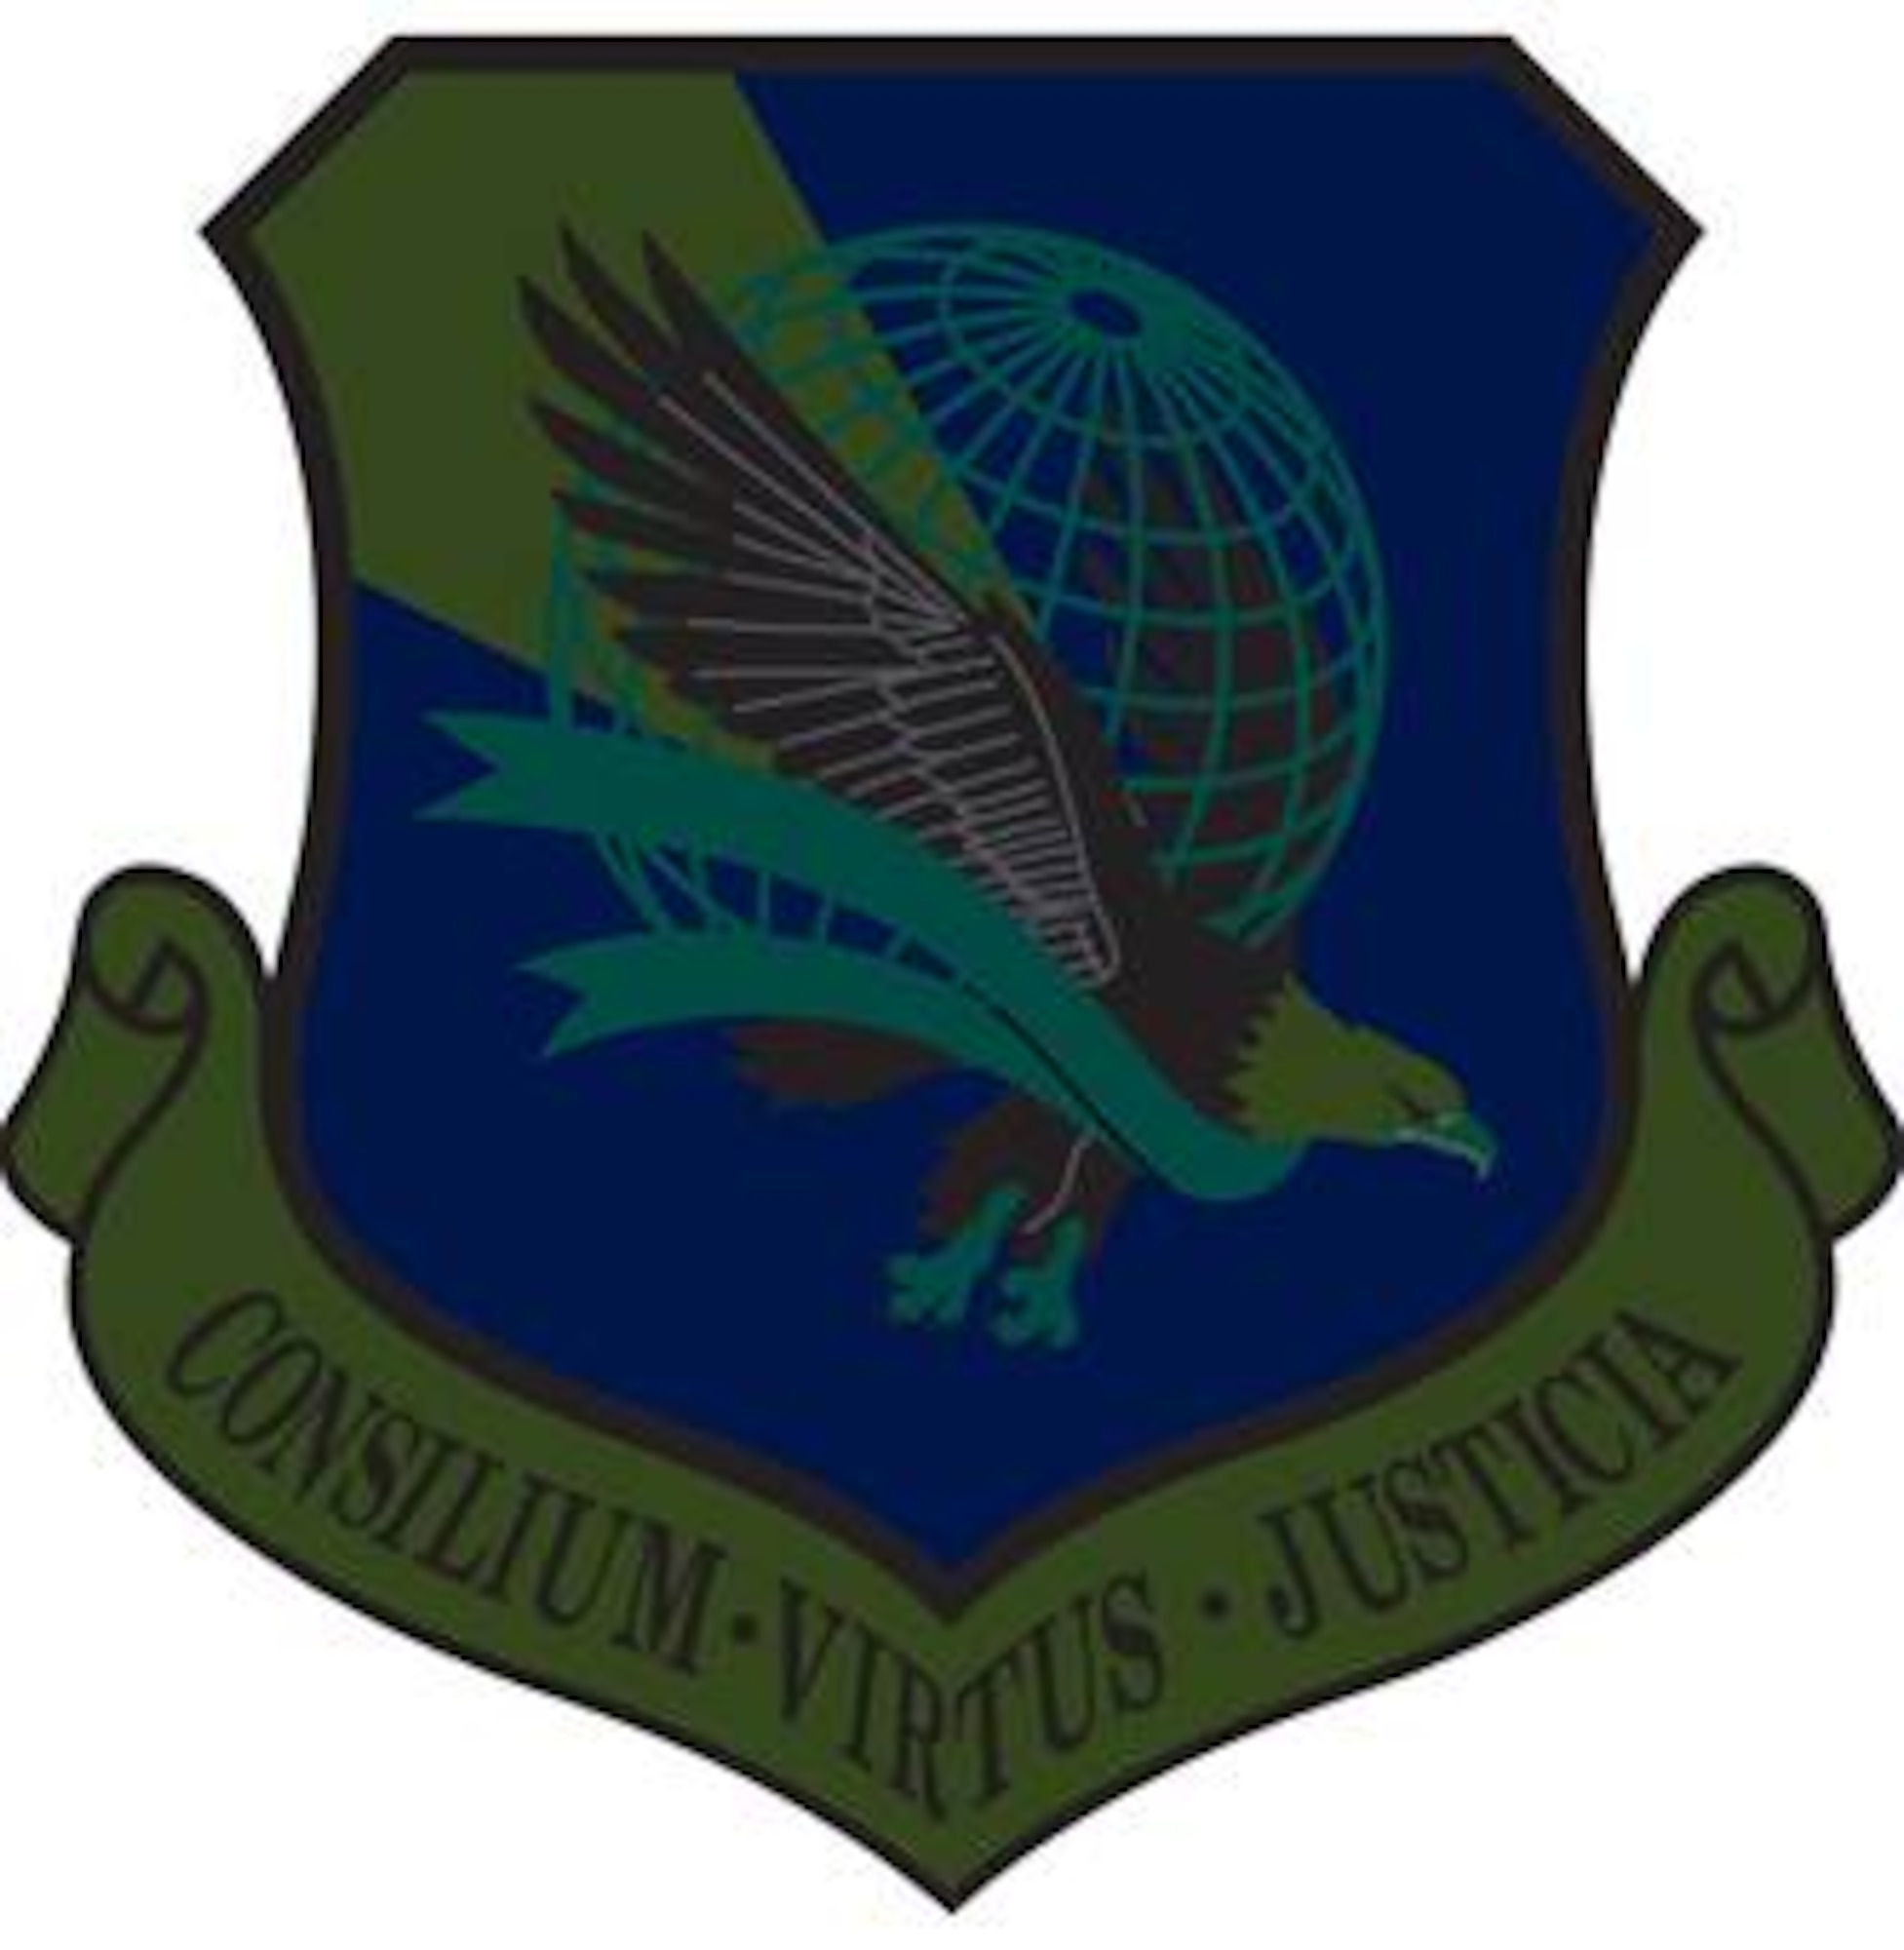 Air Force Legal Operations Agency (Camouflage). Image provided by the Air Force Historical Research Agency. In accordance with Chapter 3 of AFI 84-105, commercial reproduction of this emblem is NOT permitted without the permission of the proponent organizational/unit commander. The image is 7x7 inches @ 300 ppi. 